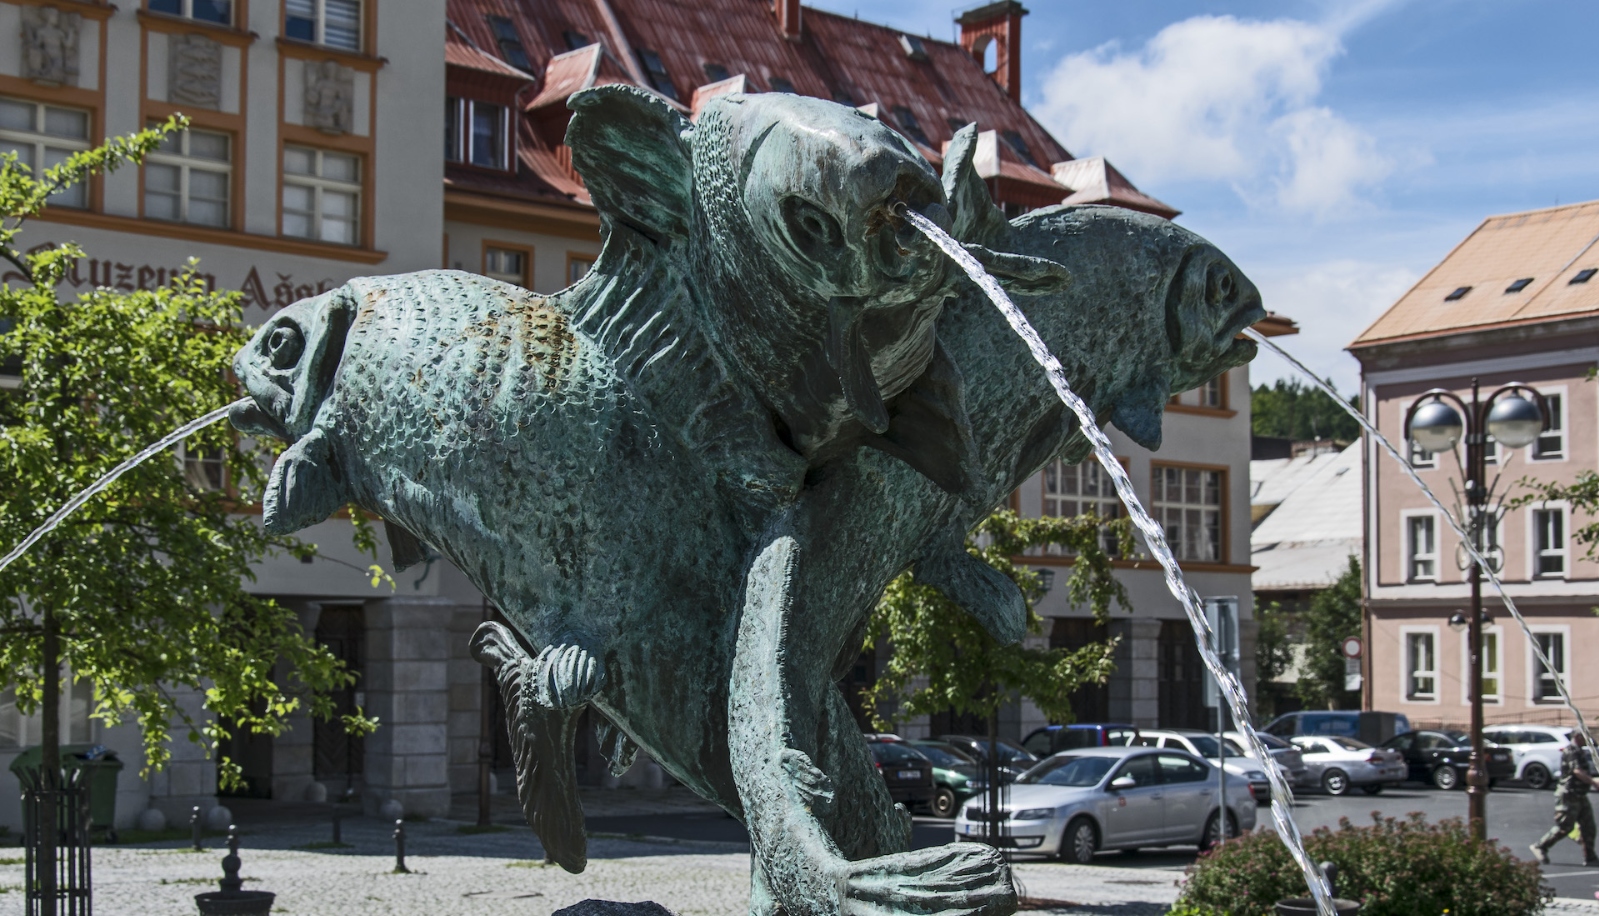 Discover the sights of the city of Aš